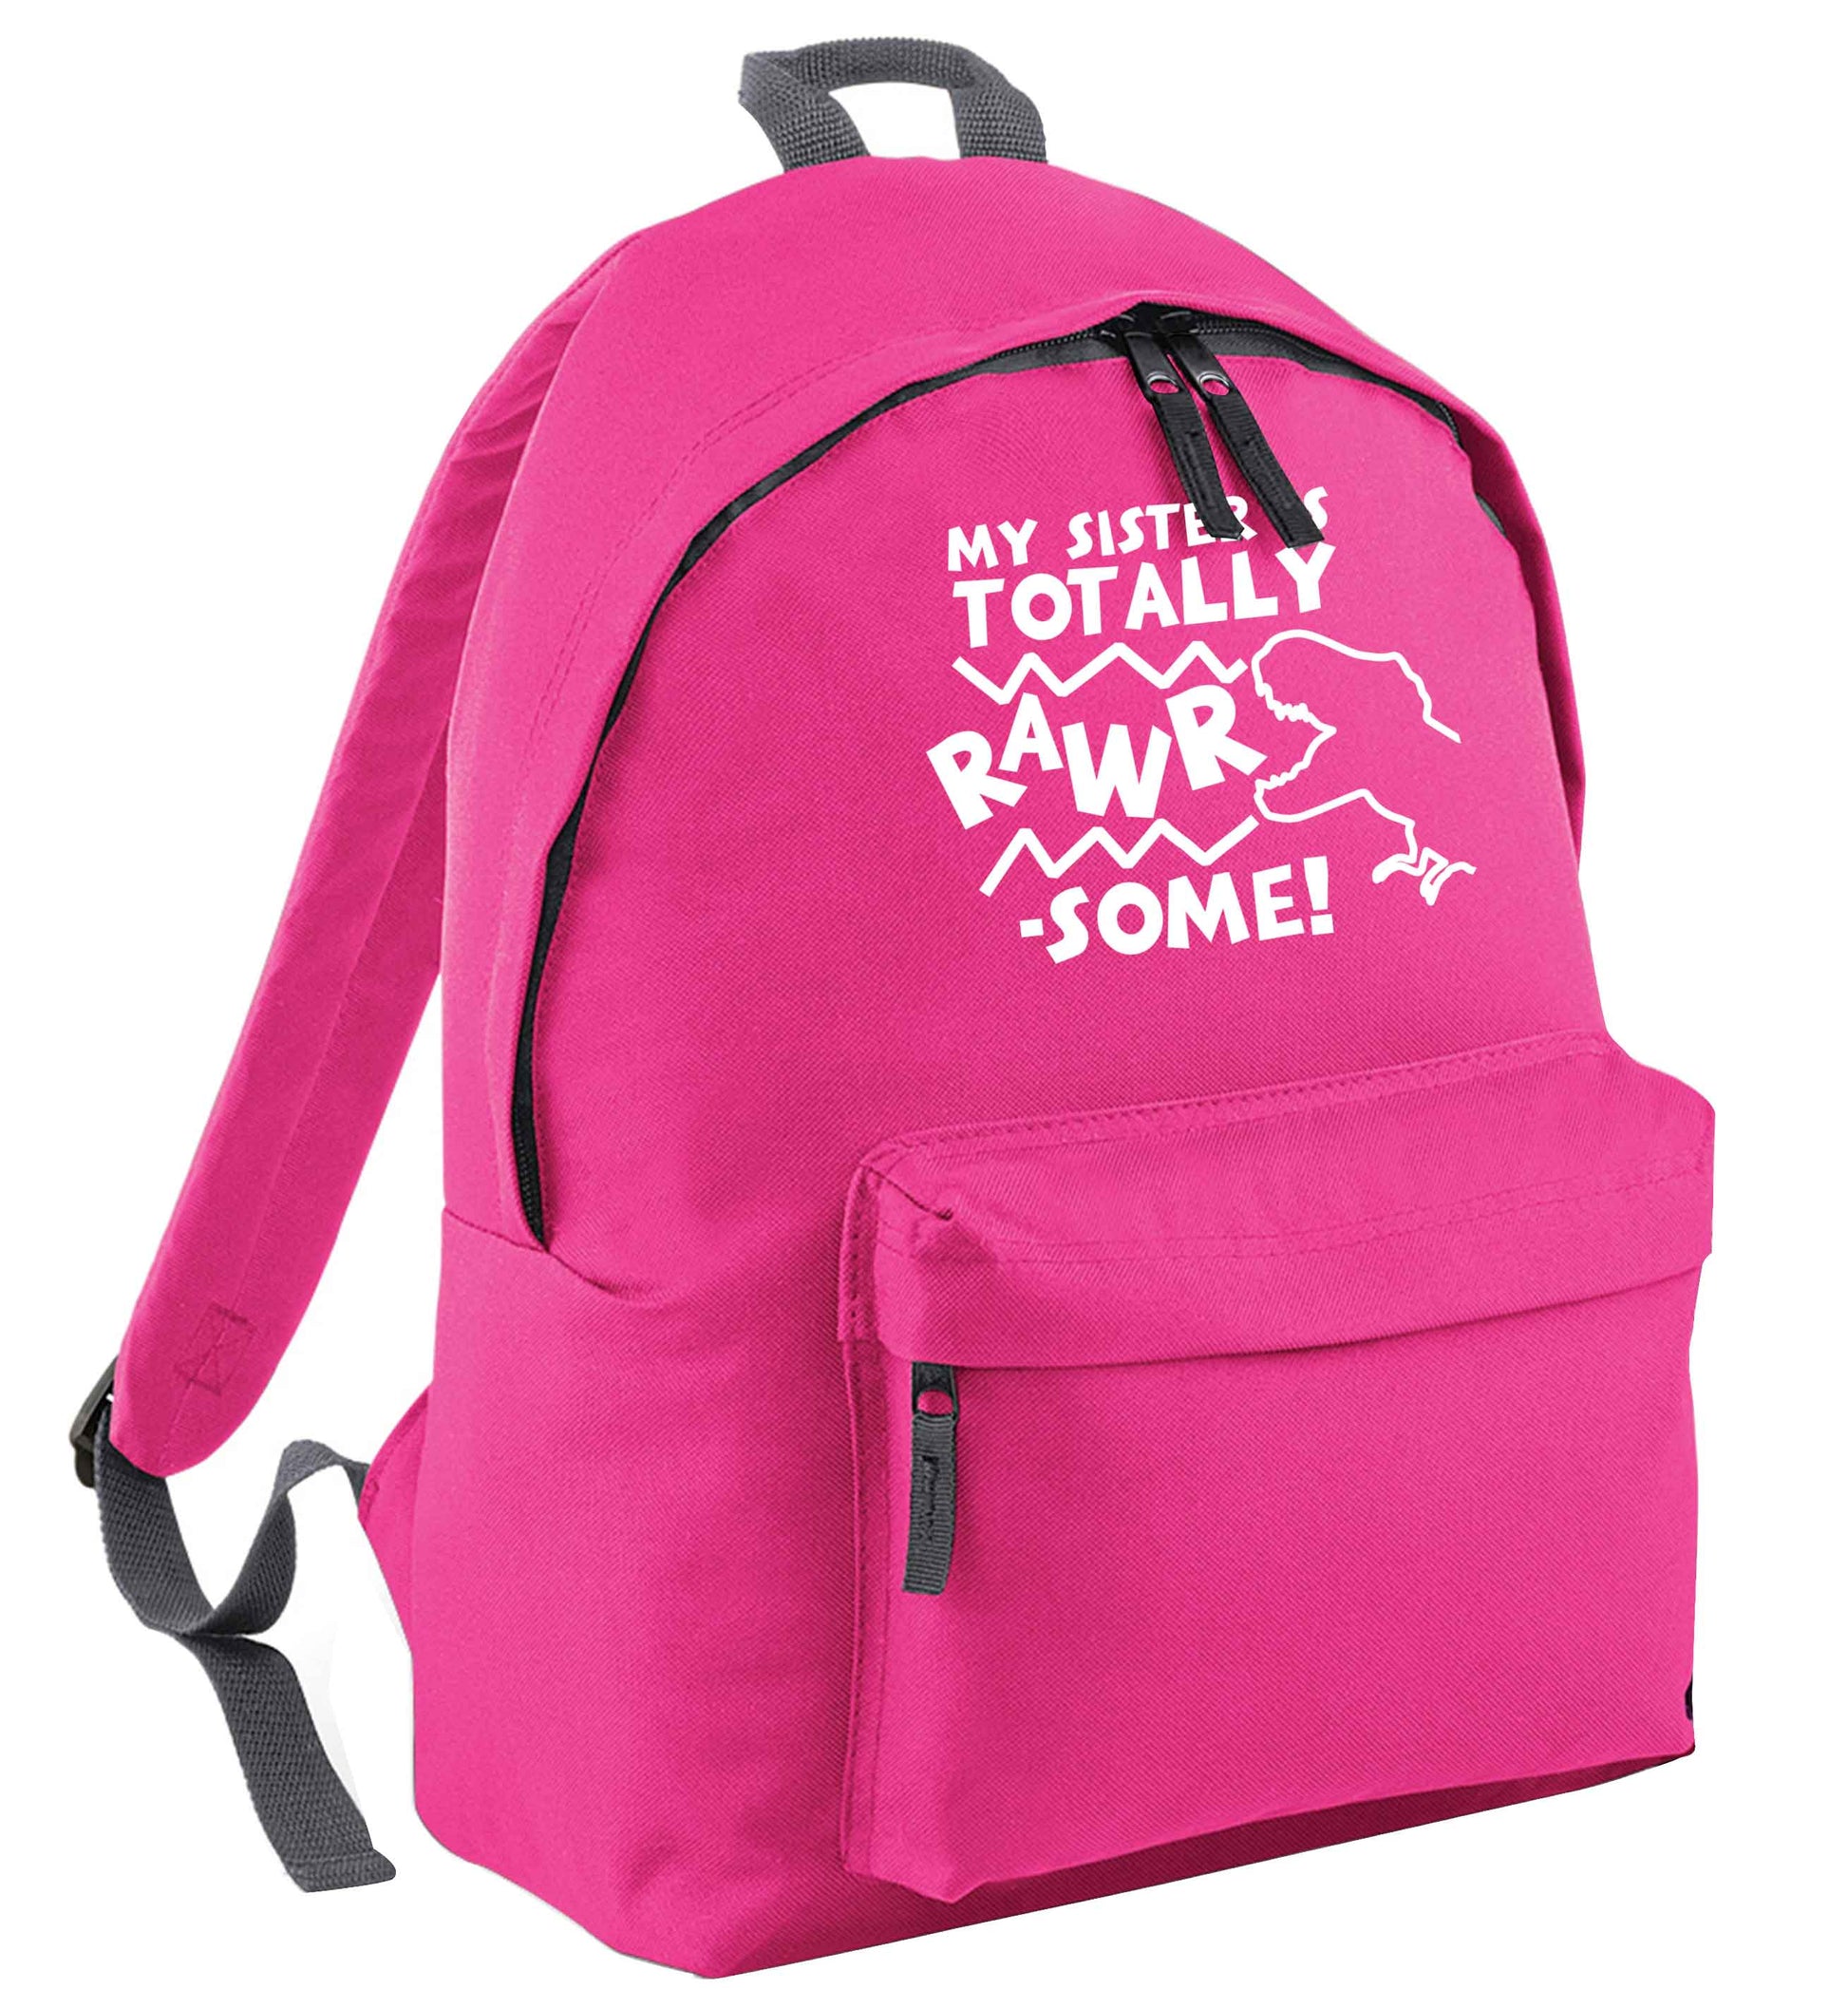 My sister is totally rawrsome pink childrens backpack